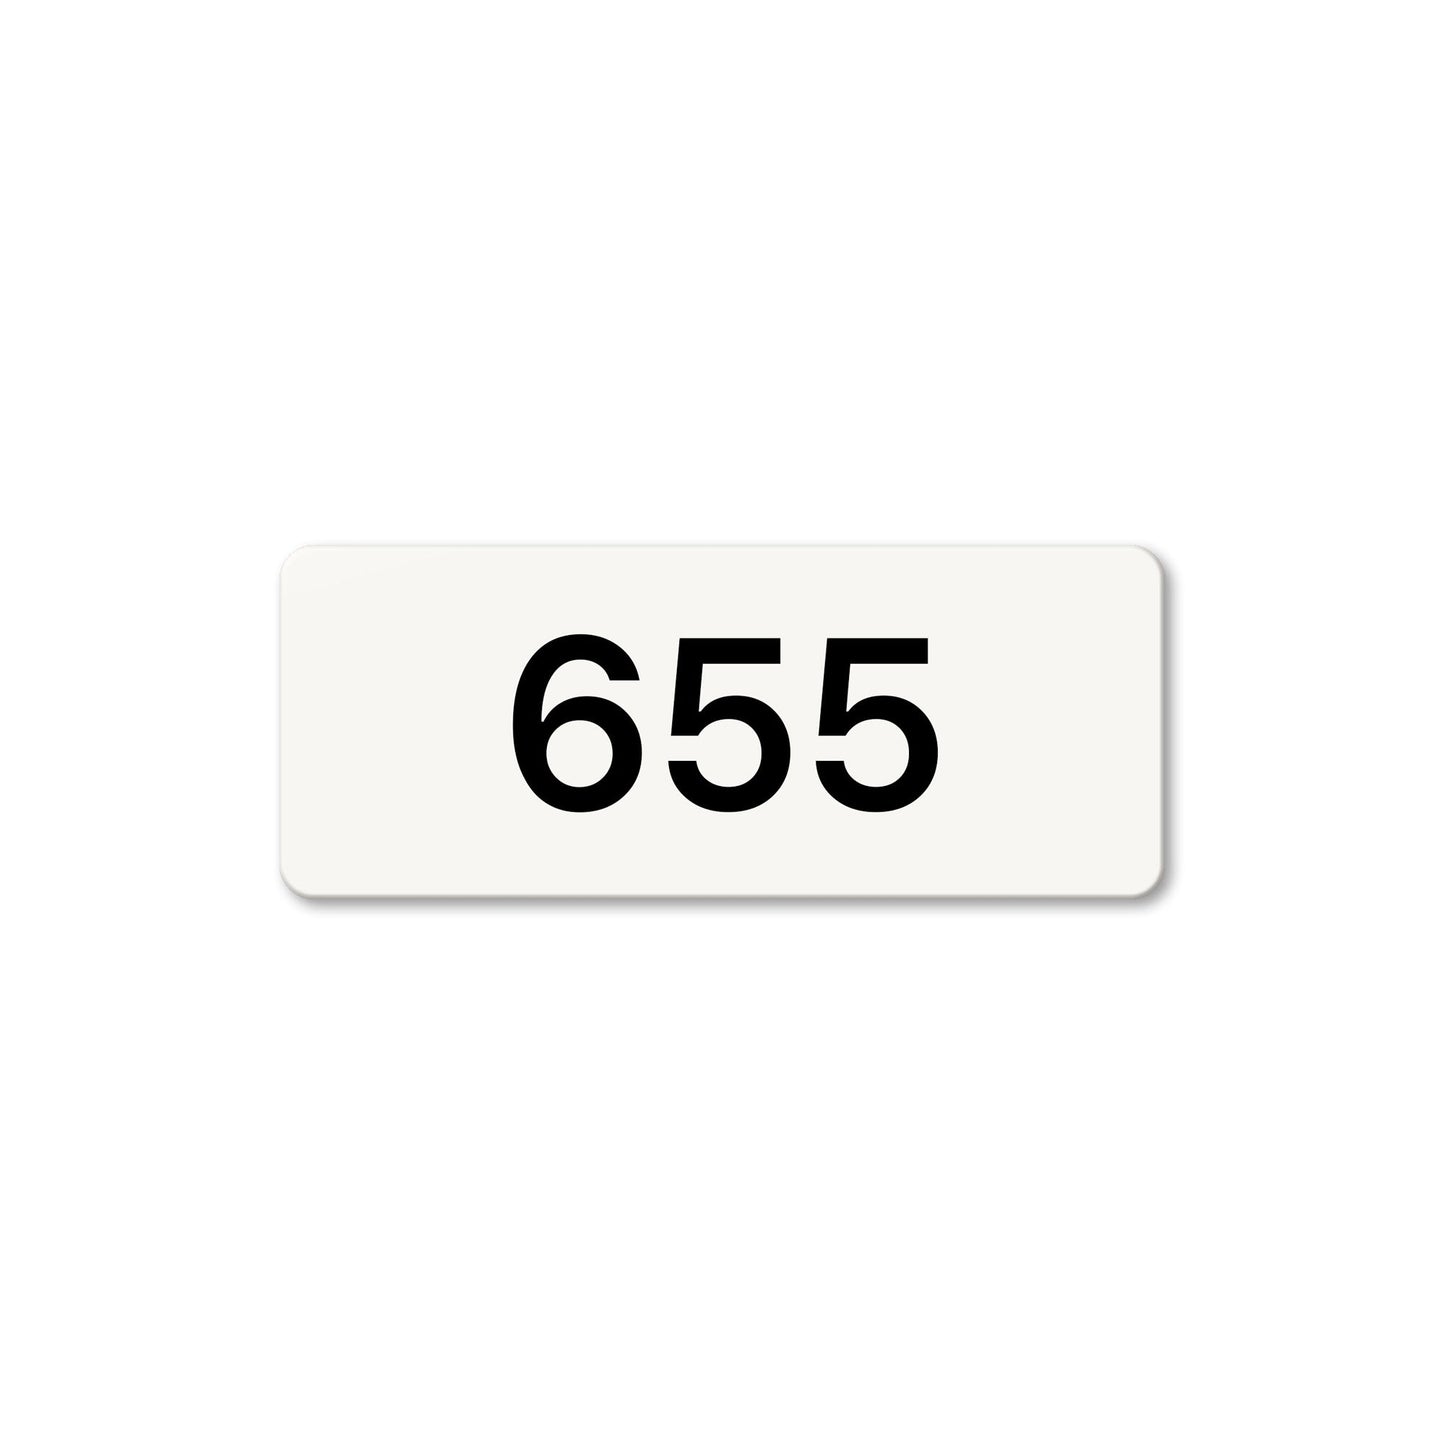 Numeral 655